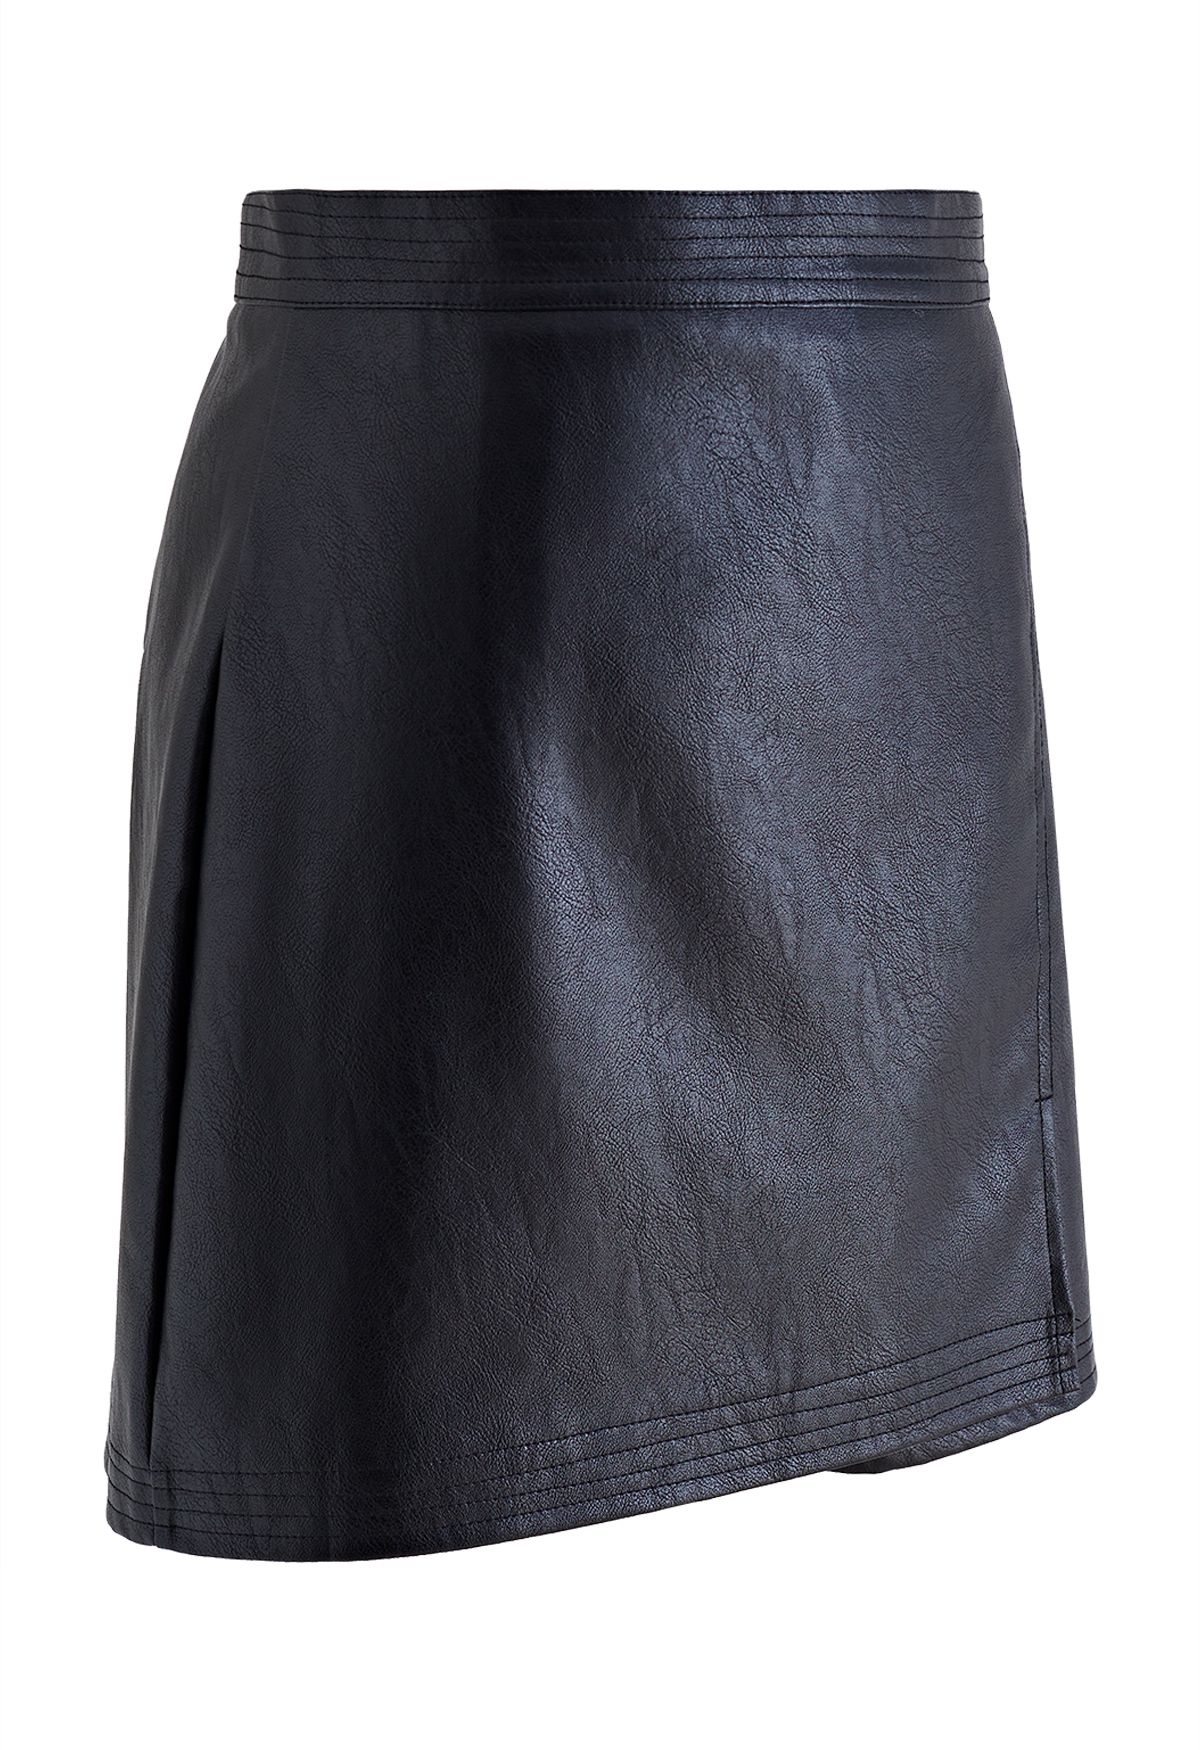 Nifty Faux Leather Flap Mini Bud Skirt in Black